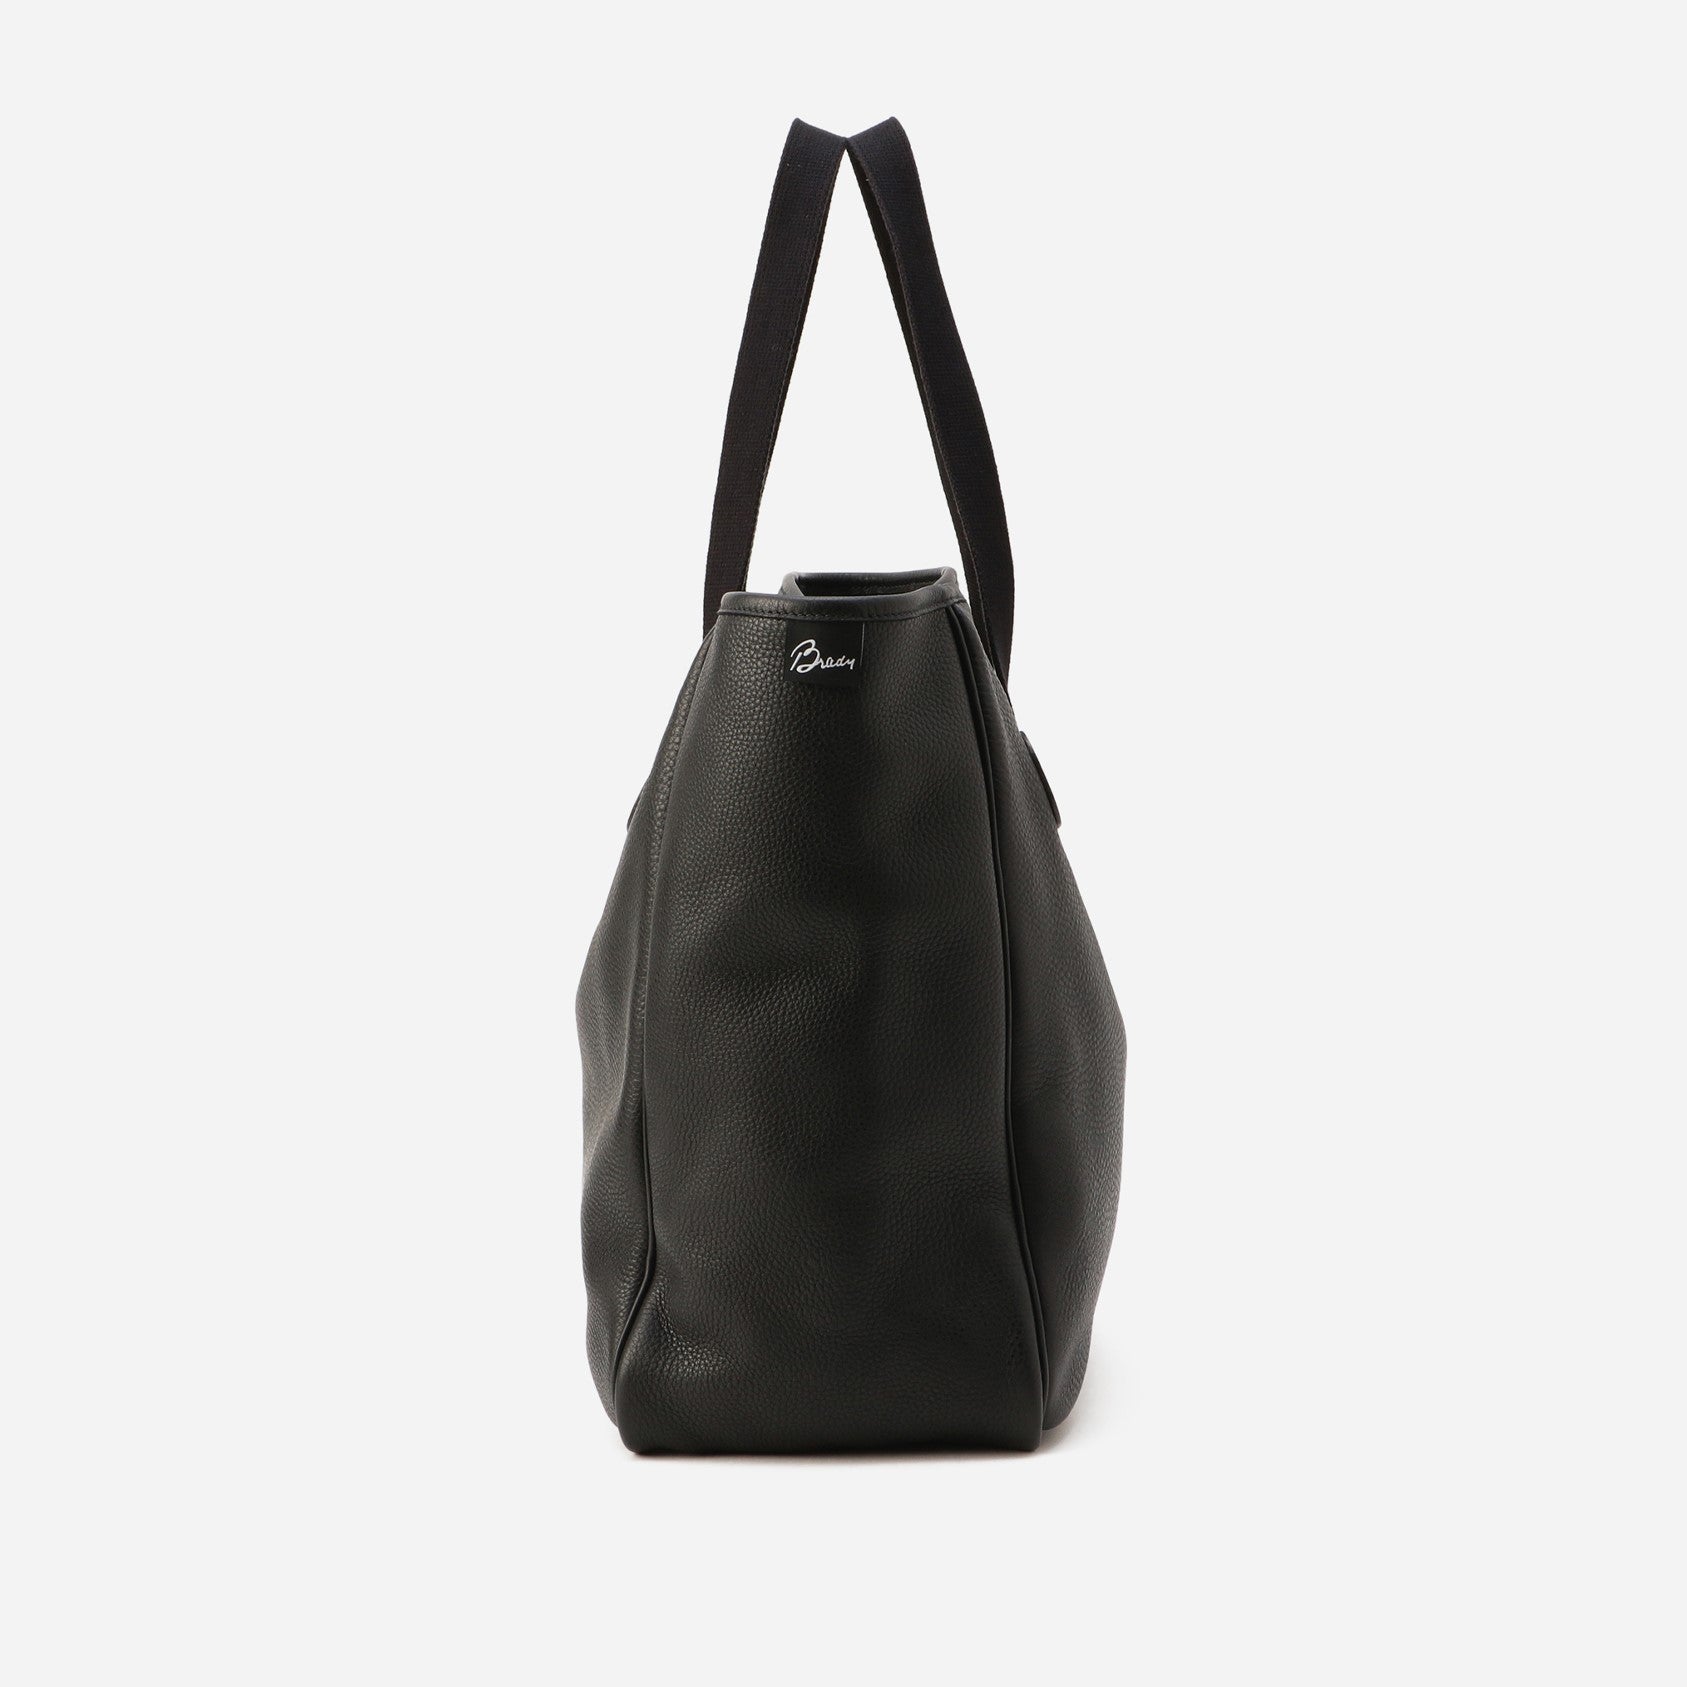 SMALL CARRYALL LEATHER